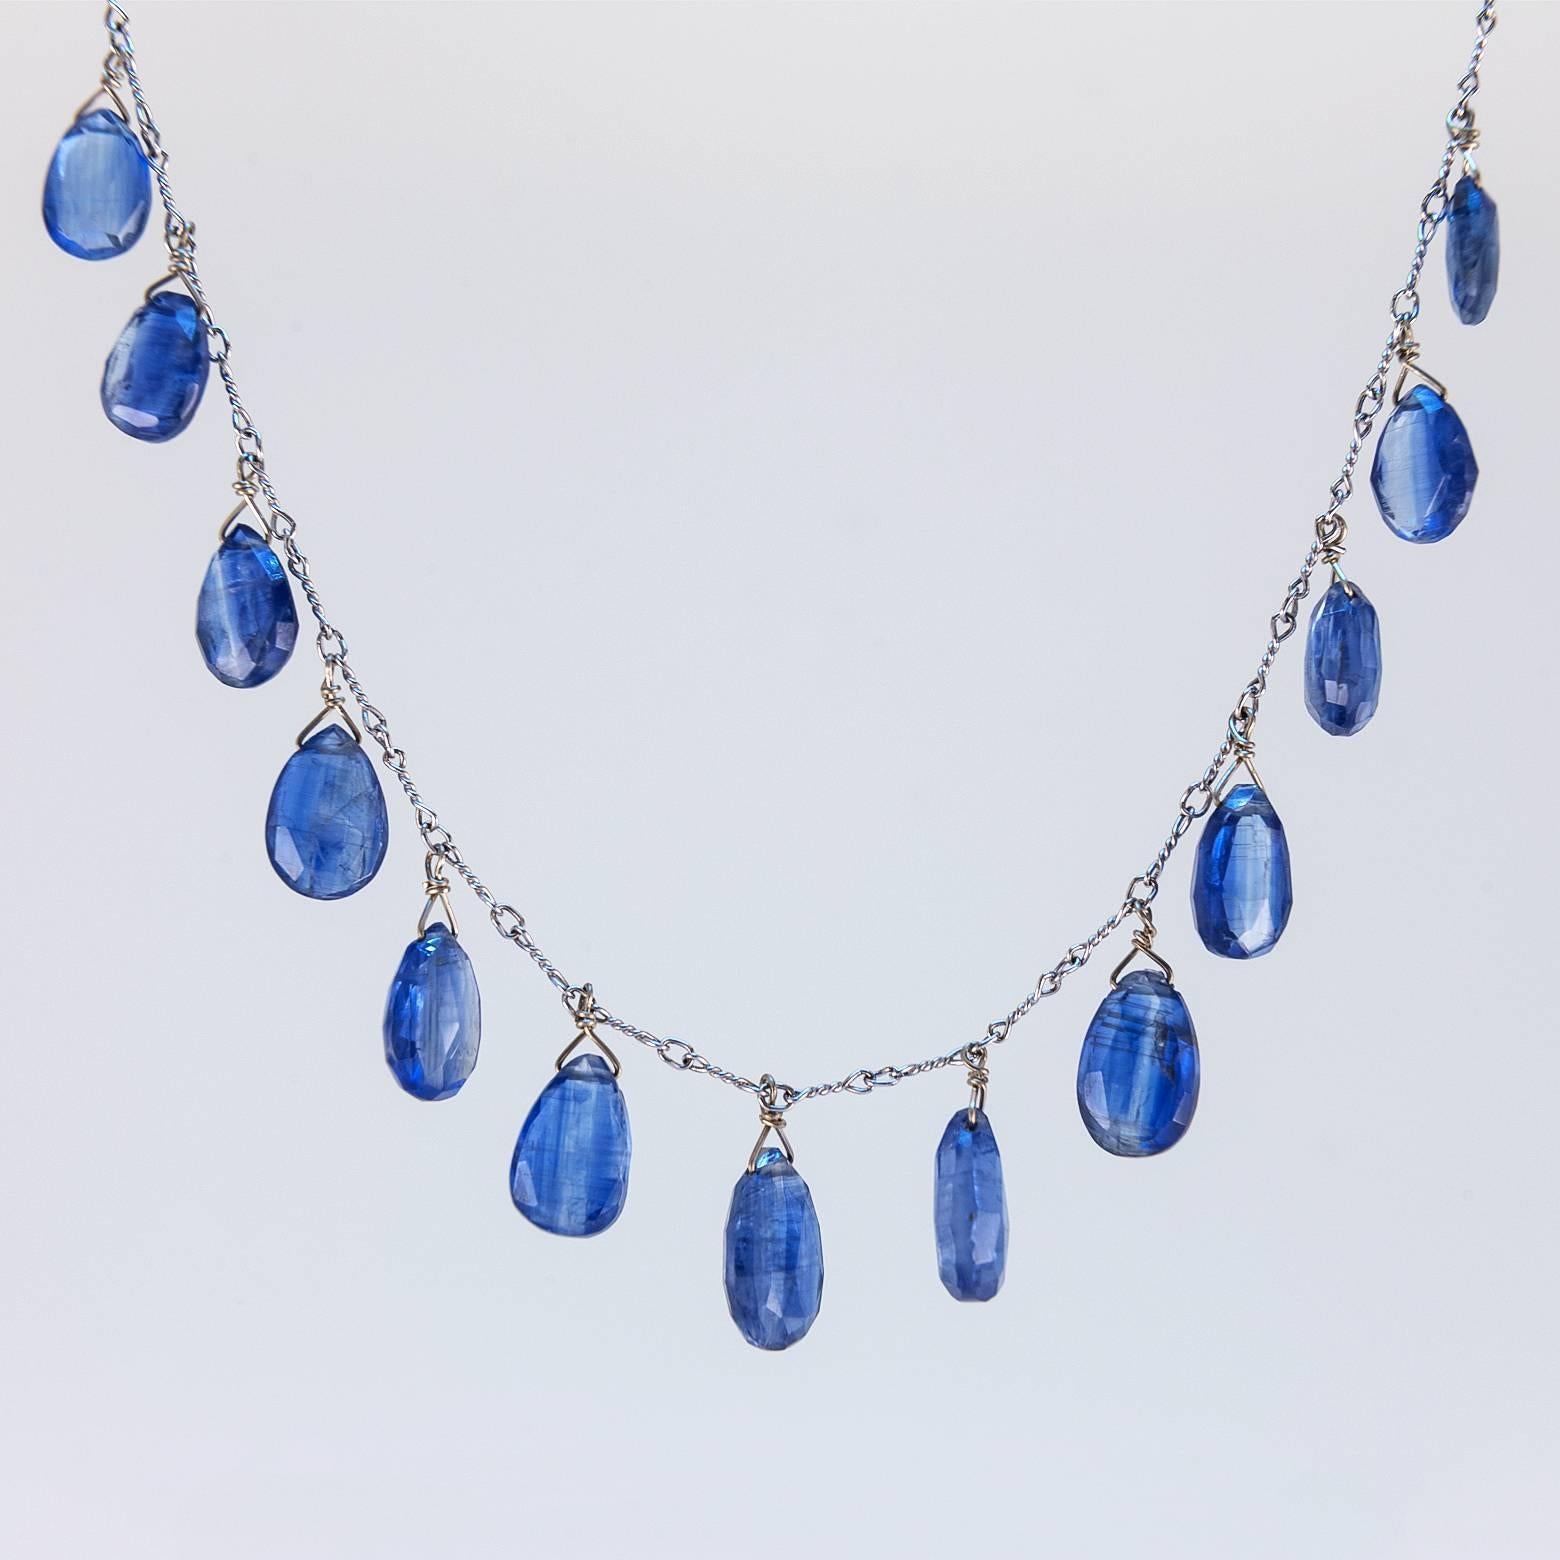 These 13 beautiful royal blue kyanite briolettes glow while they hang wonderfully from a 14K white gold chain. The brilliance and texture of these briolettes is astonishing as they rest easily around your neck with youth and ease. Kyanite is a